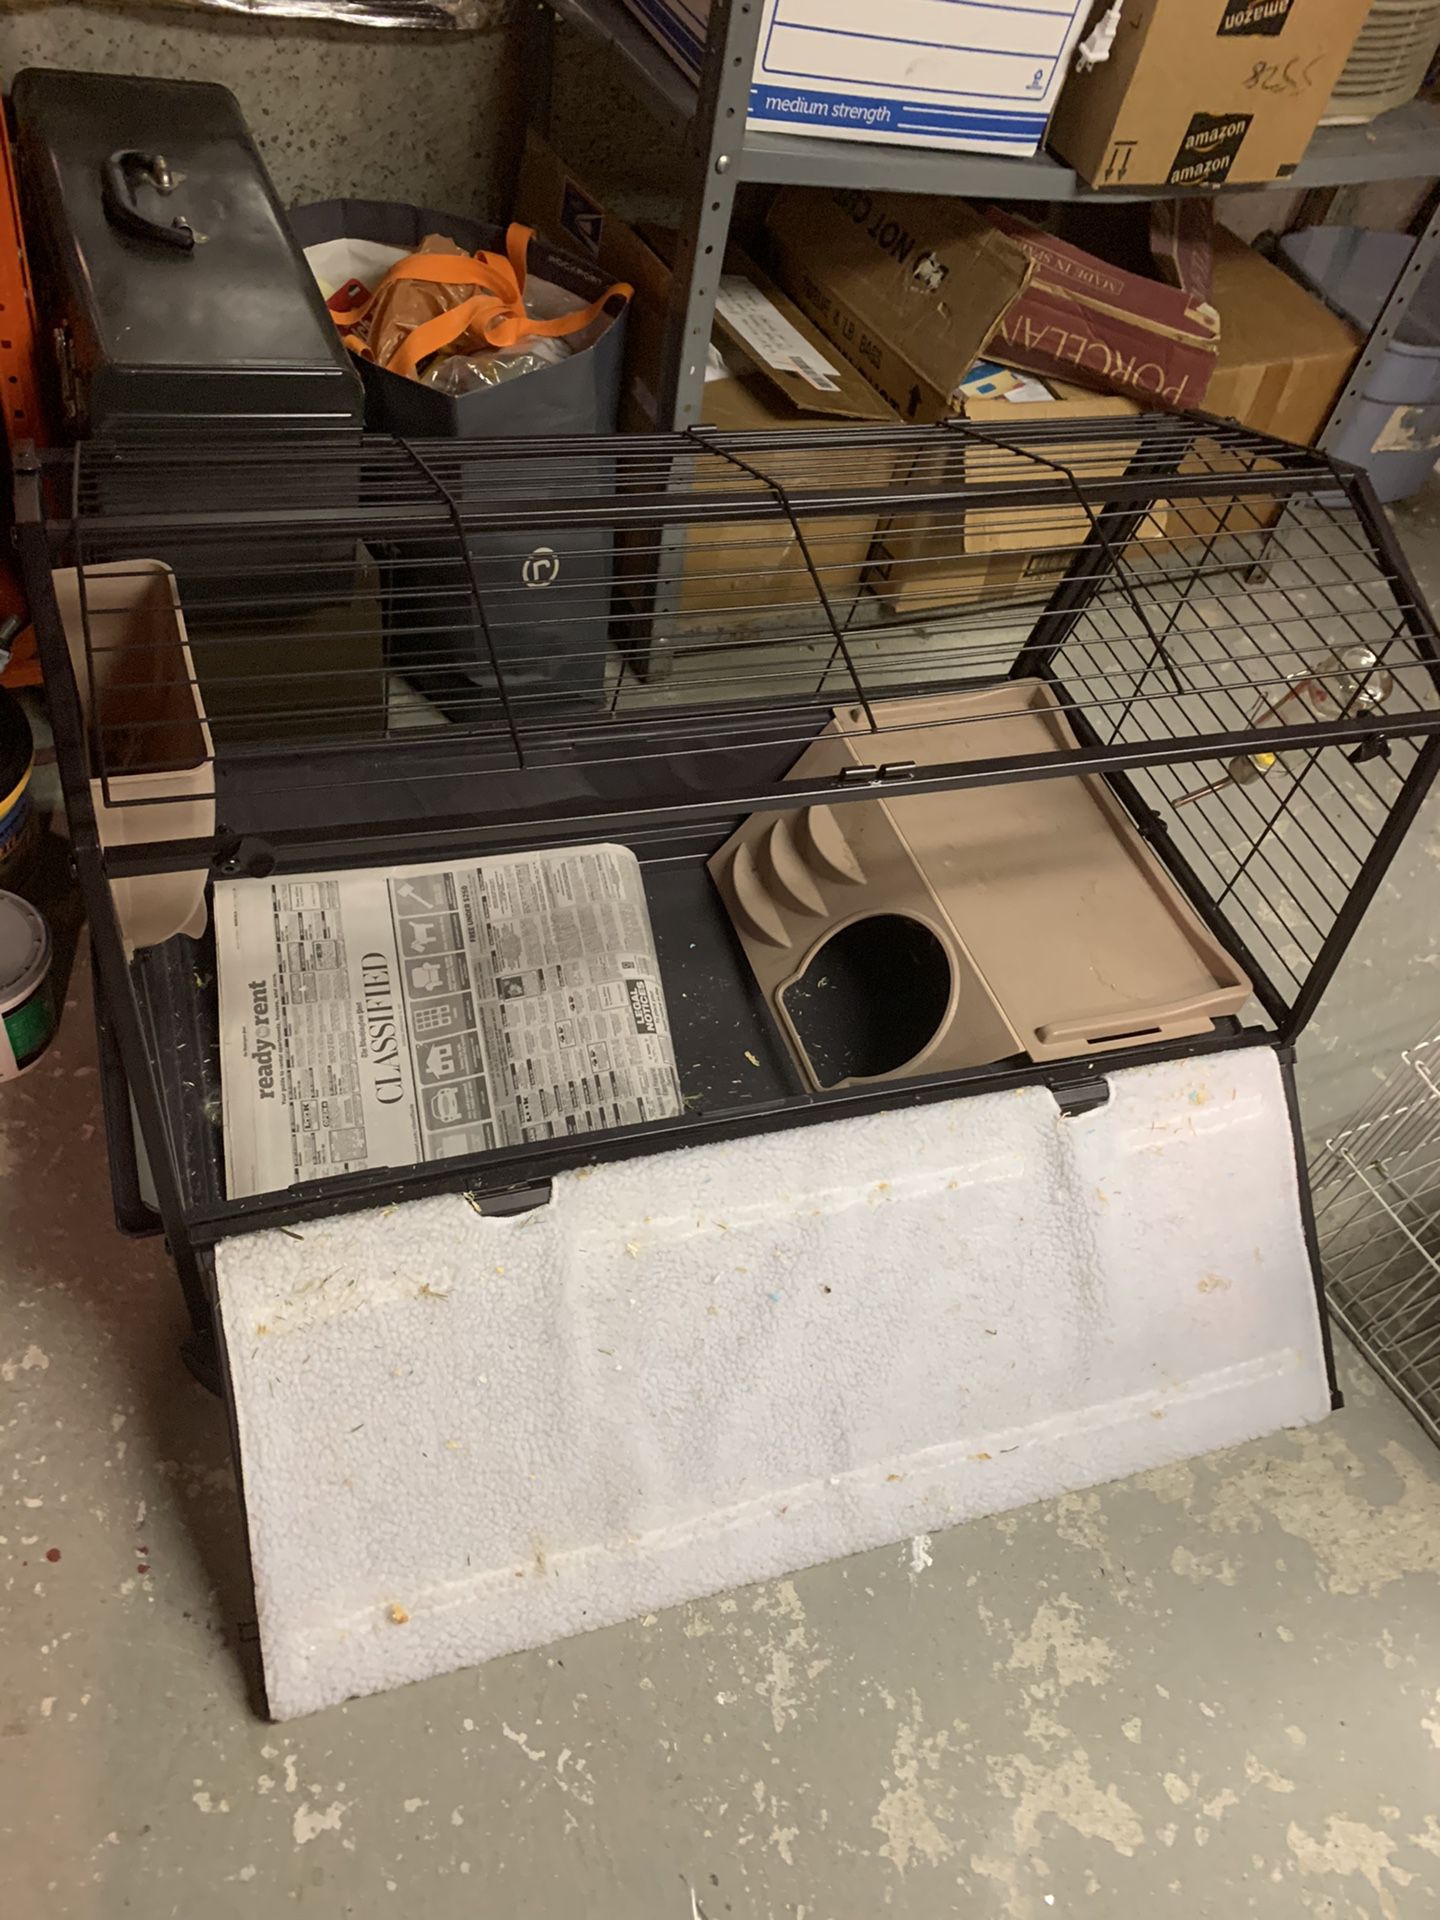 Cage for small animal